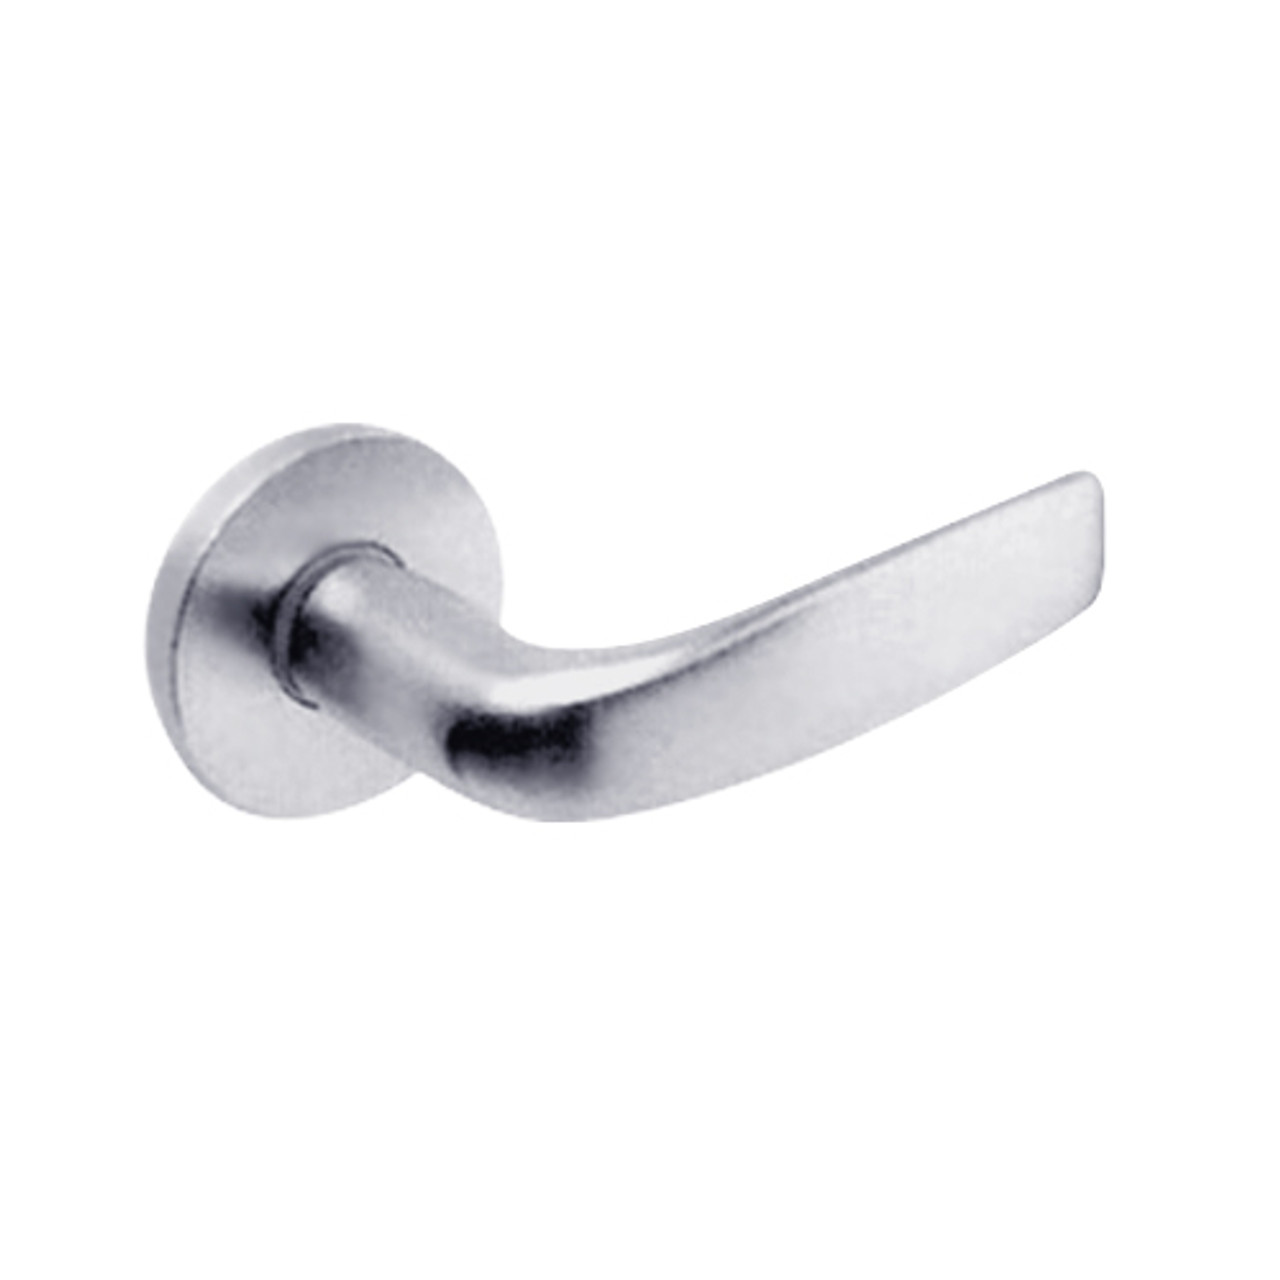 ML2069-CSA-626 Corbin Russwin ML2000 Series Mortise Institution Privacy Locksets with Citation Lever in Satin Chrome